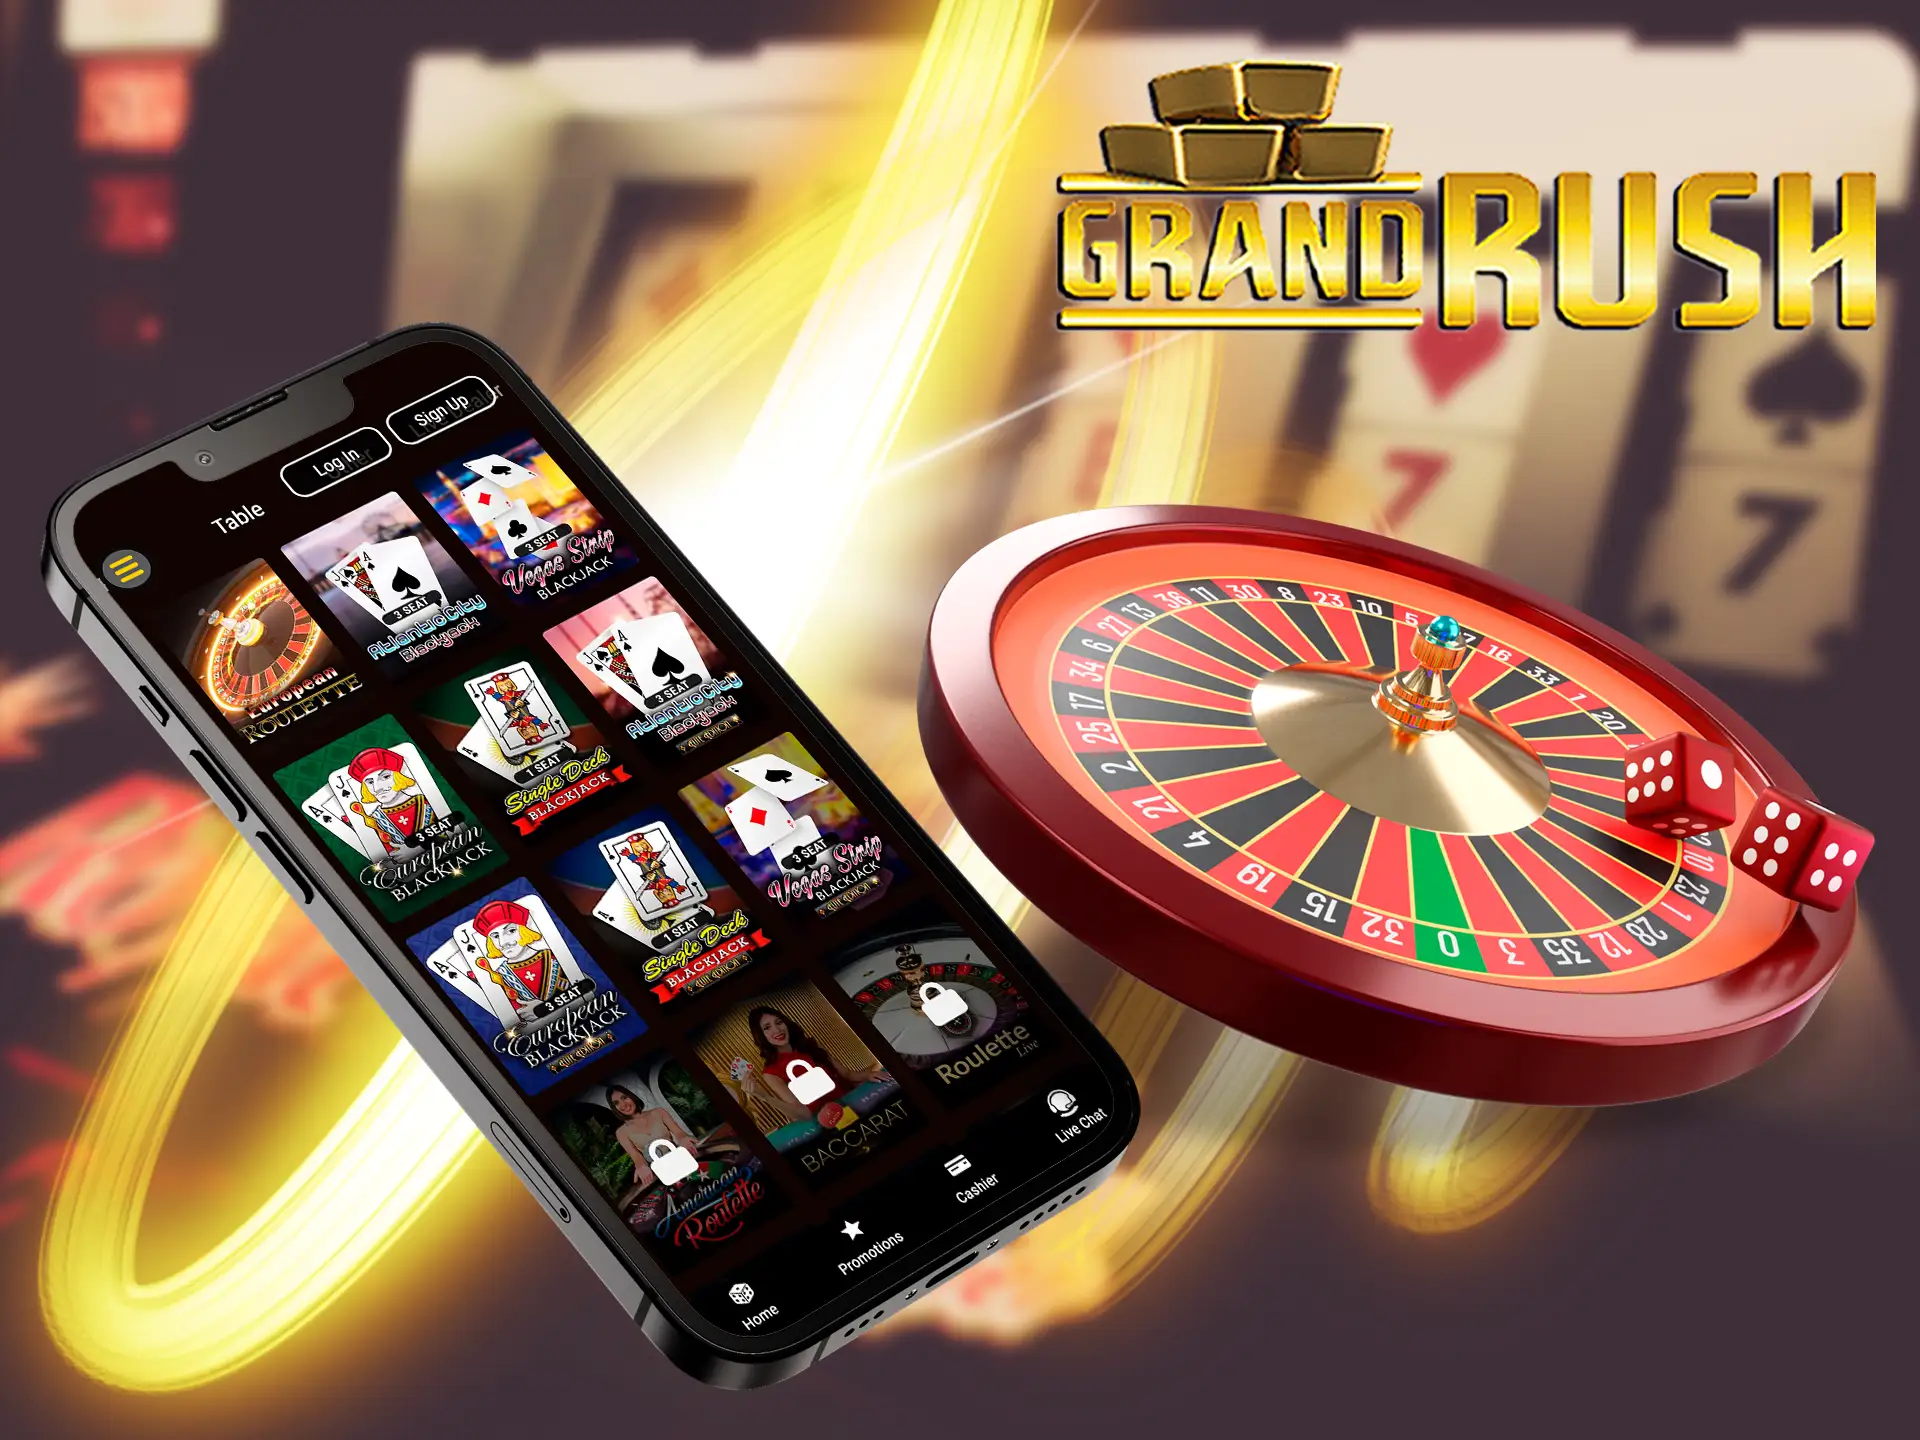 You can play Roulette games at Grand Rush via app for Android and iOS.